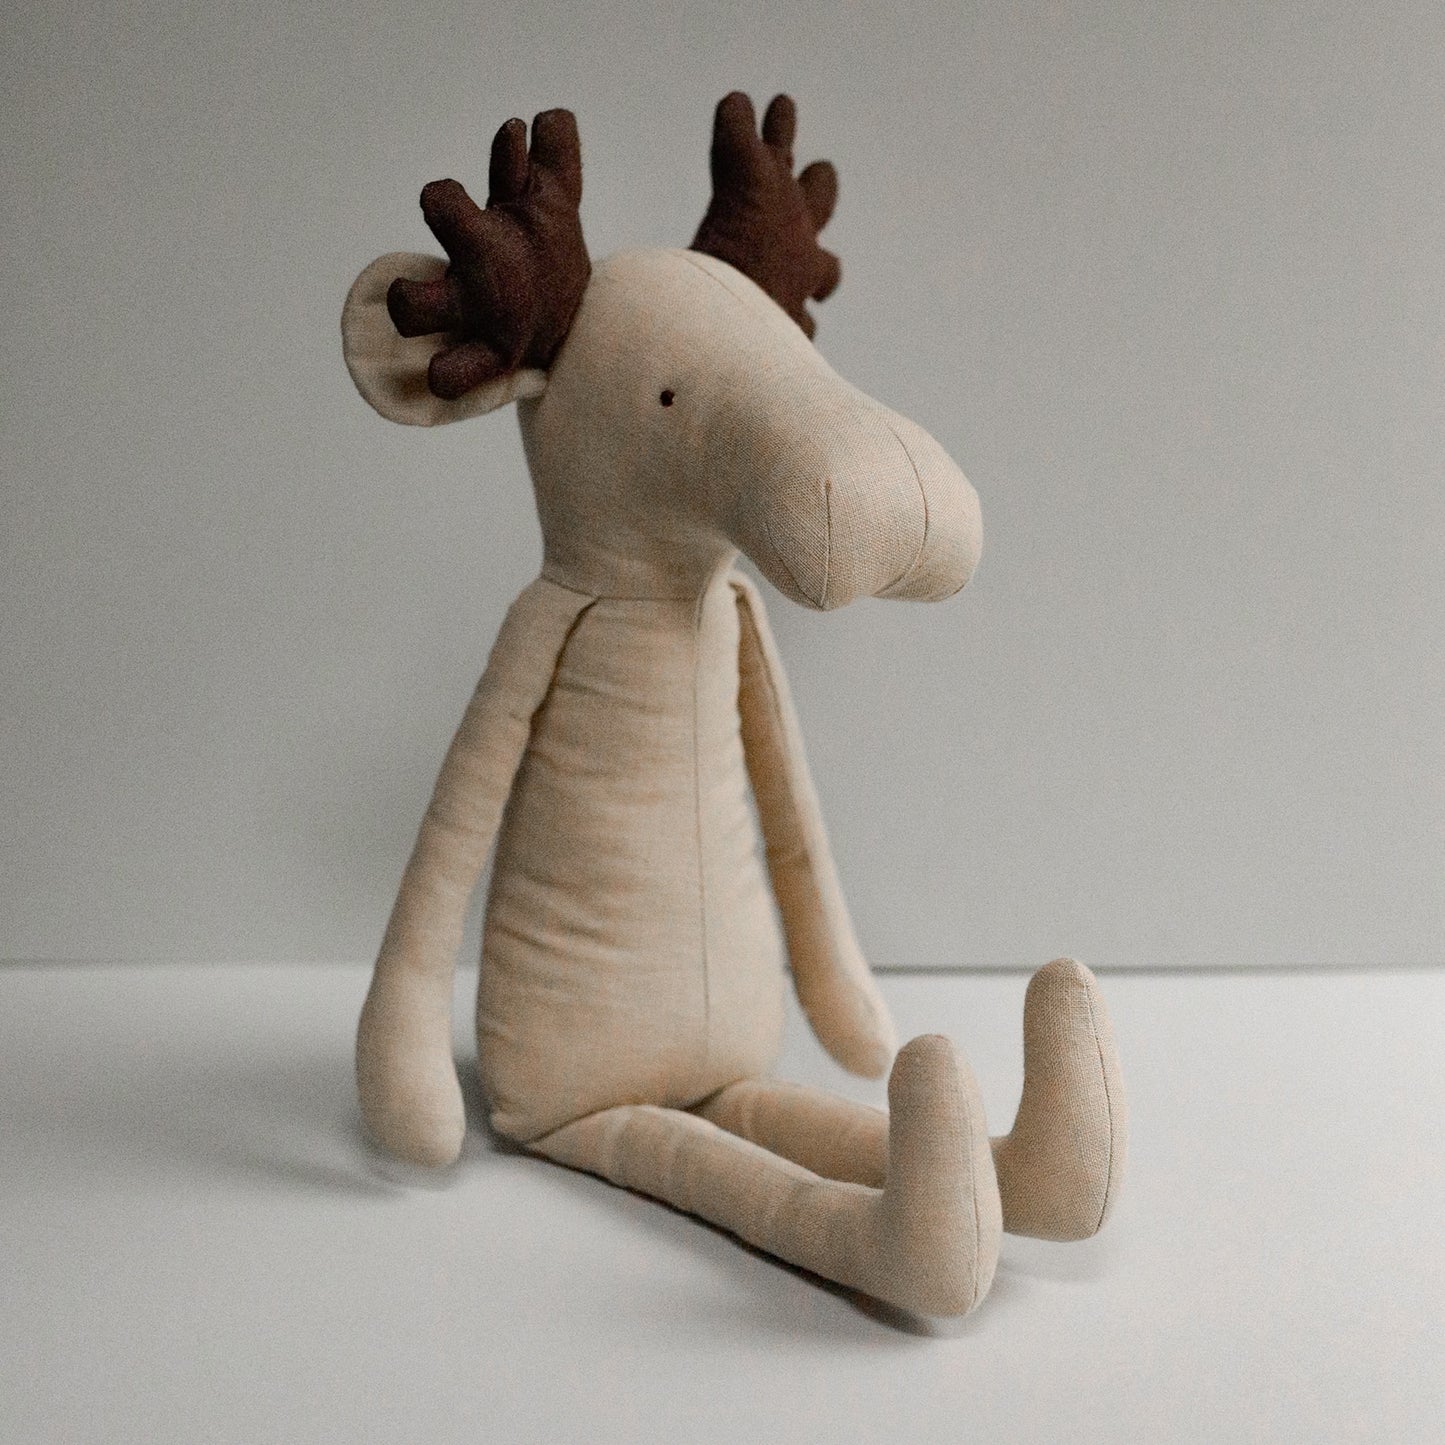 55 cm Moose making kit without any pattern or tutorial